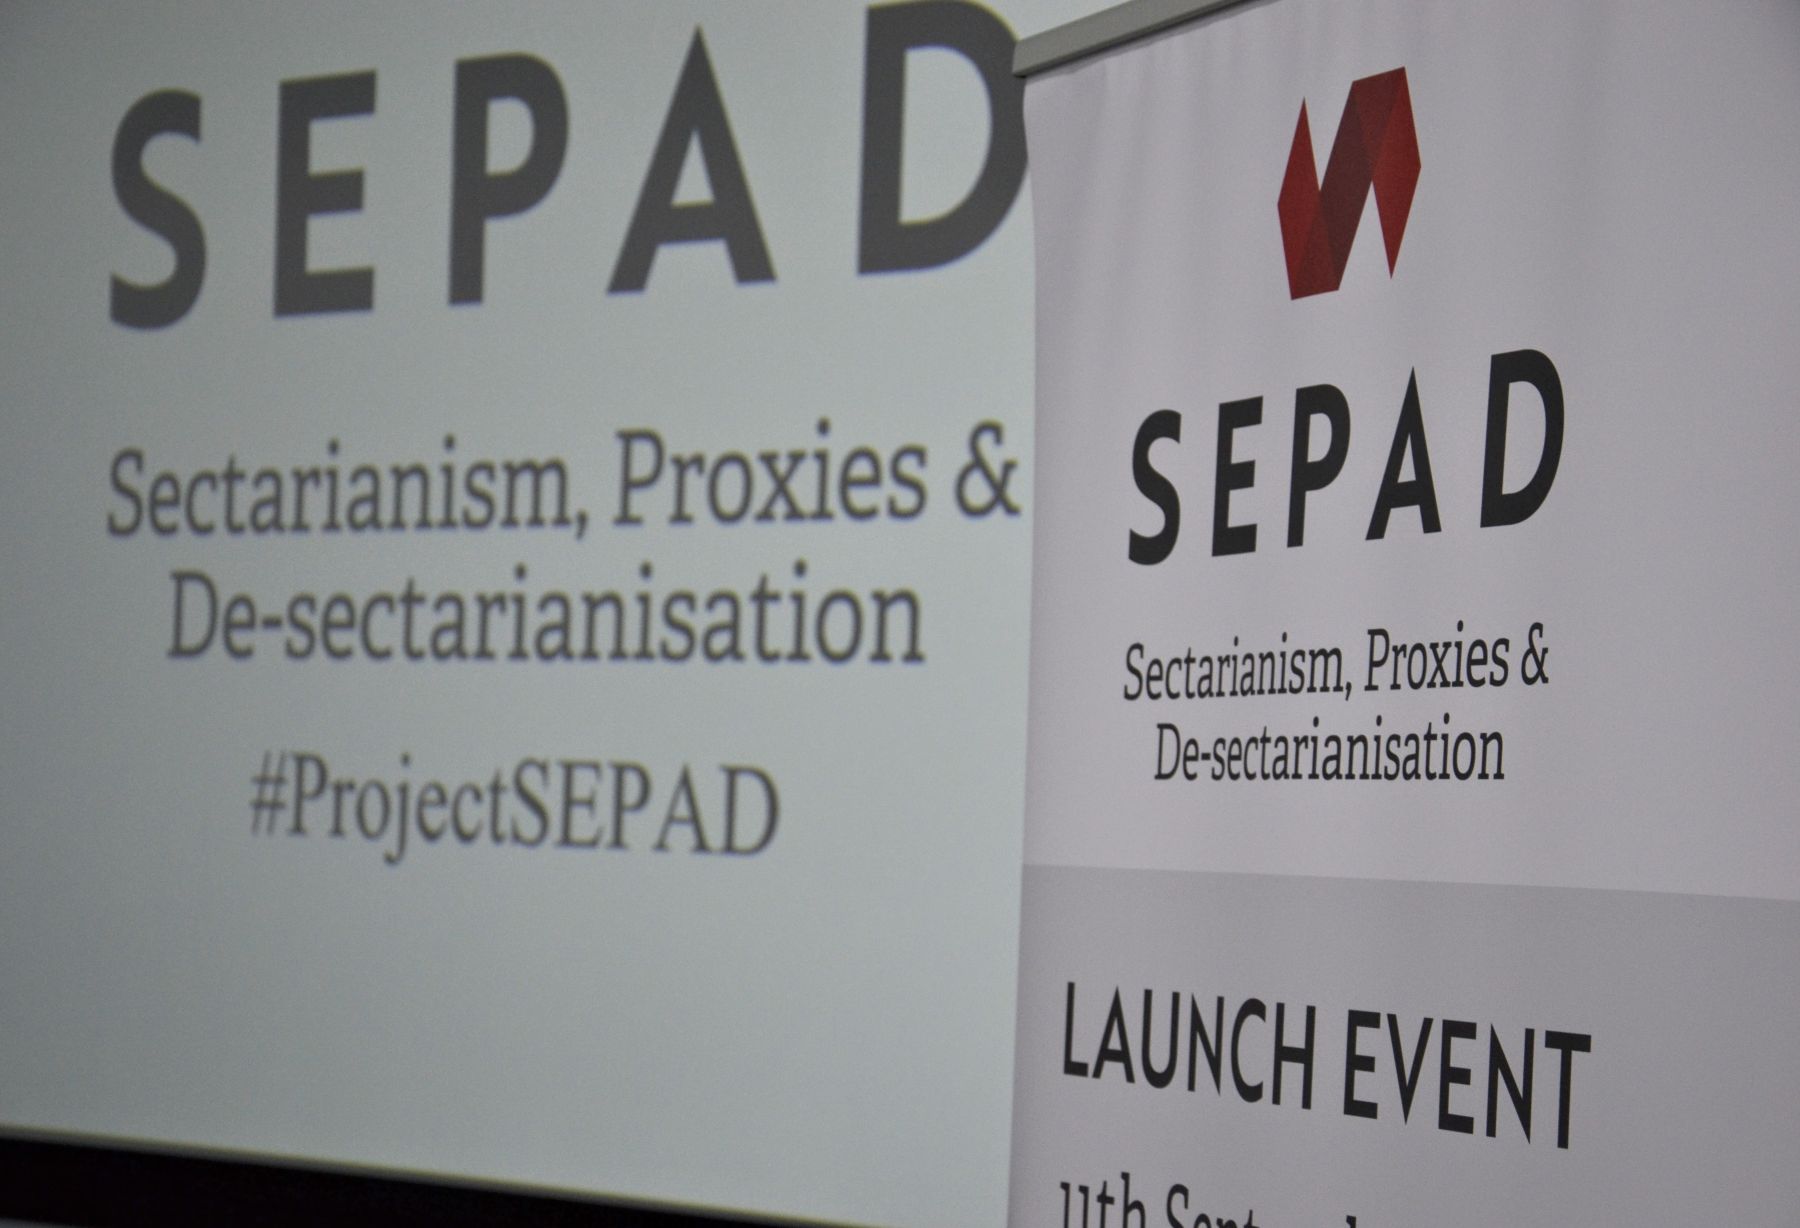 News: SEPAD receives funding from Carnegie Corporation of New York